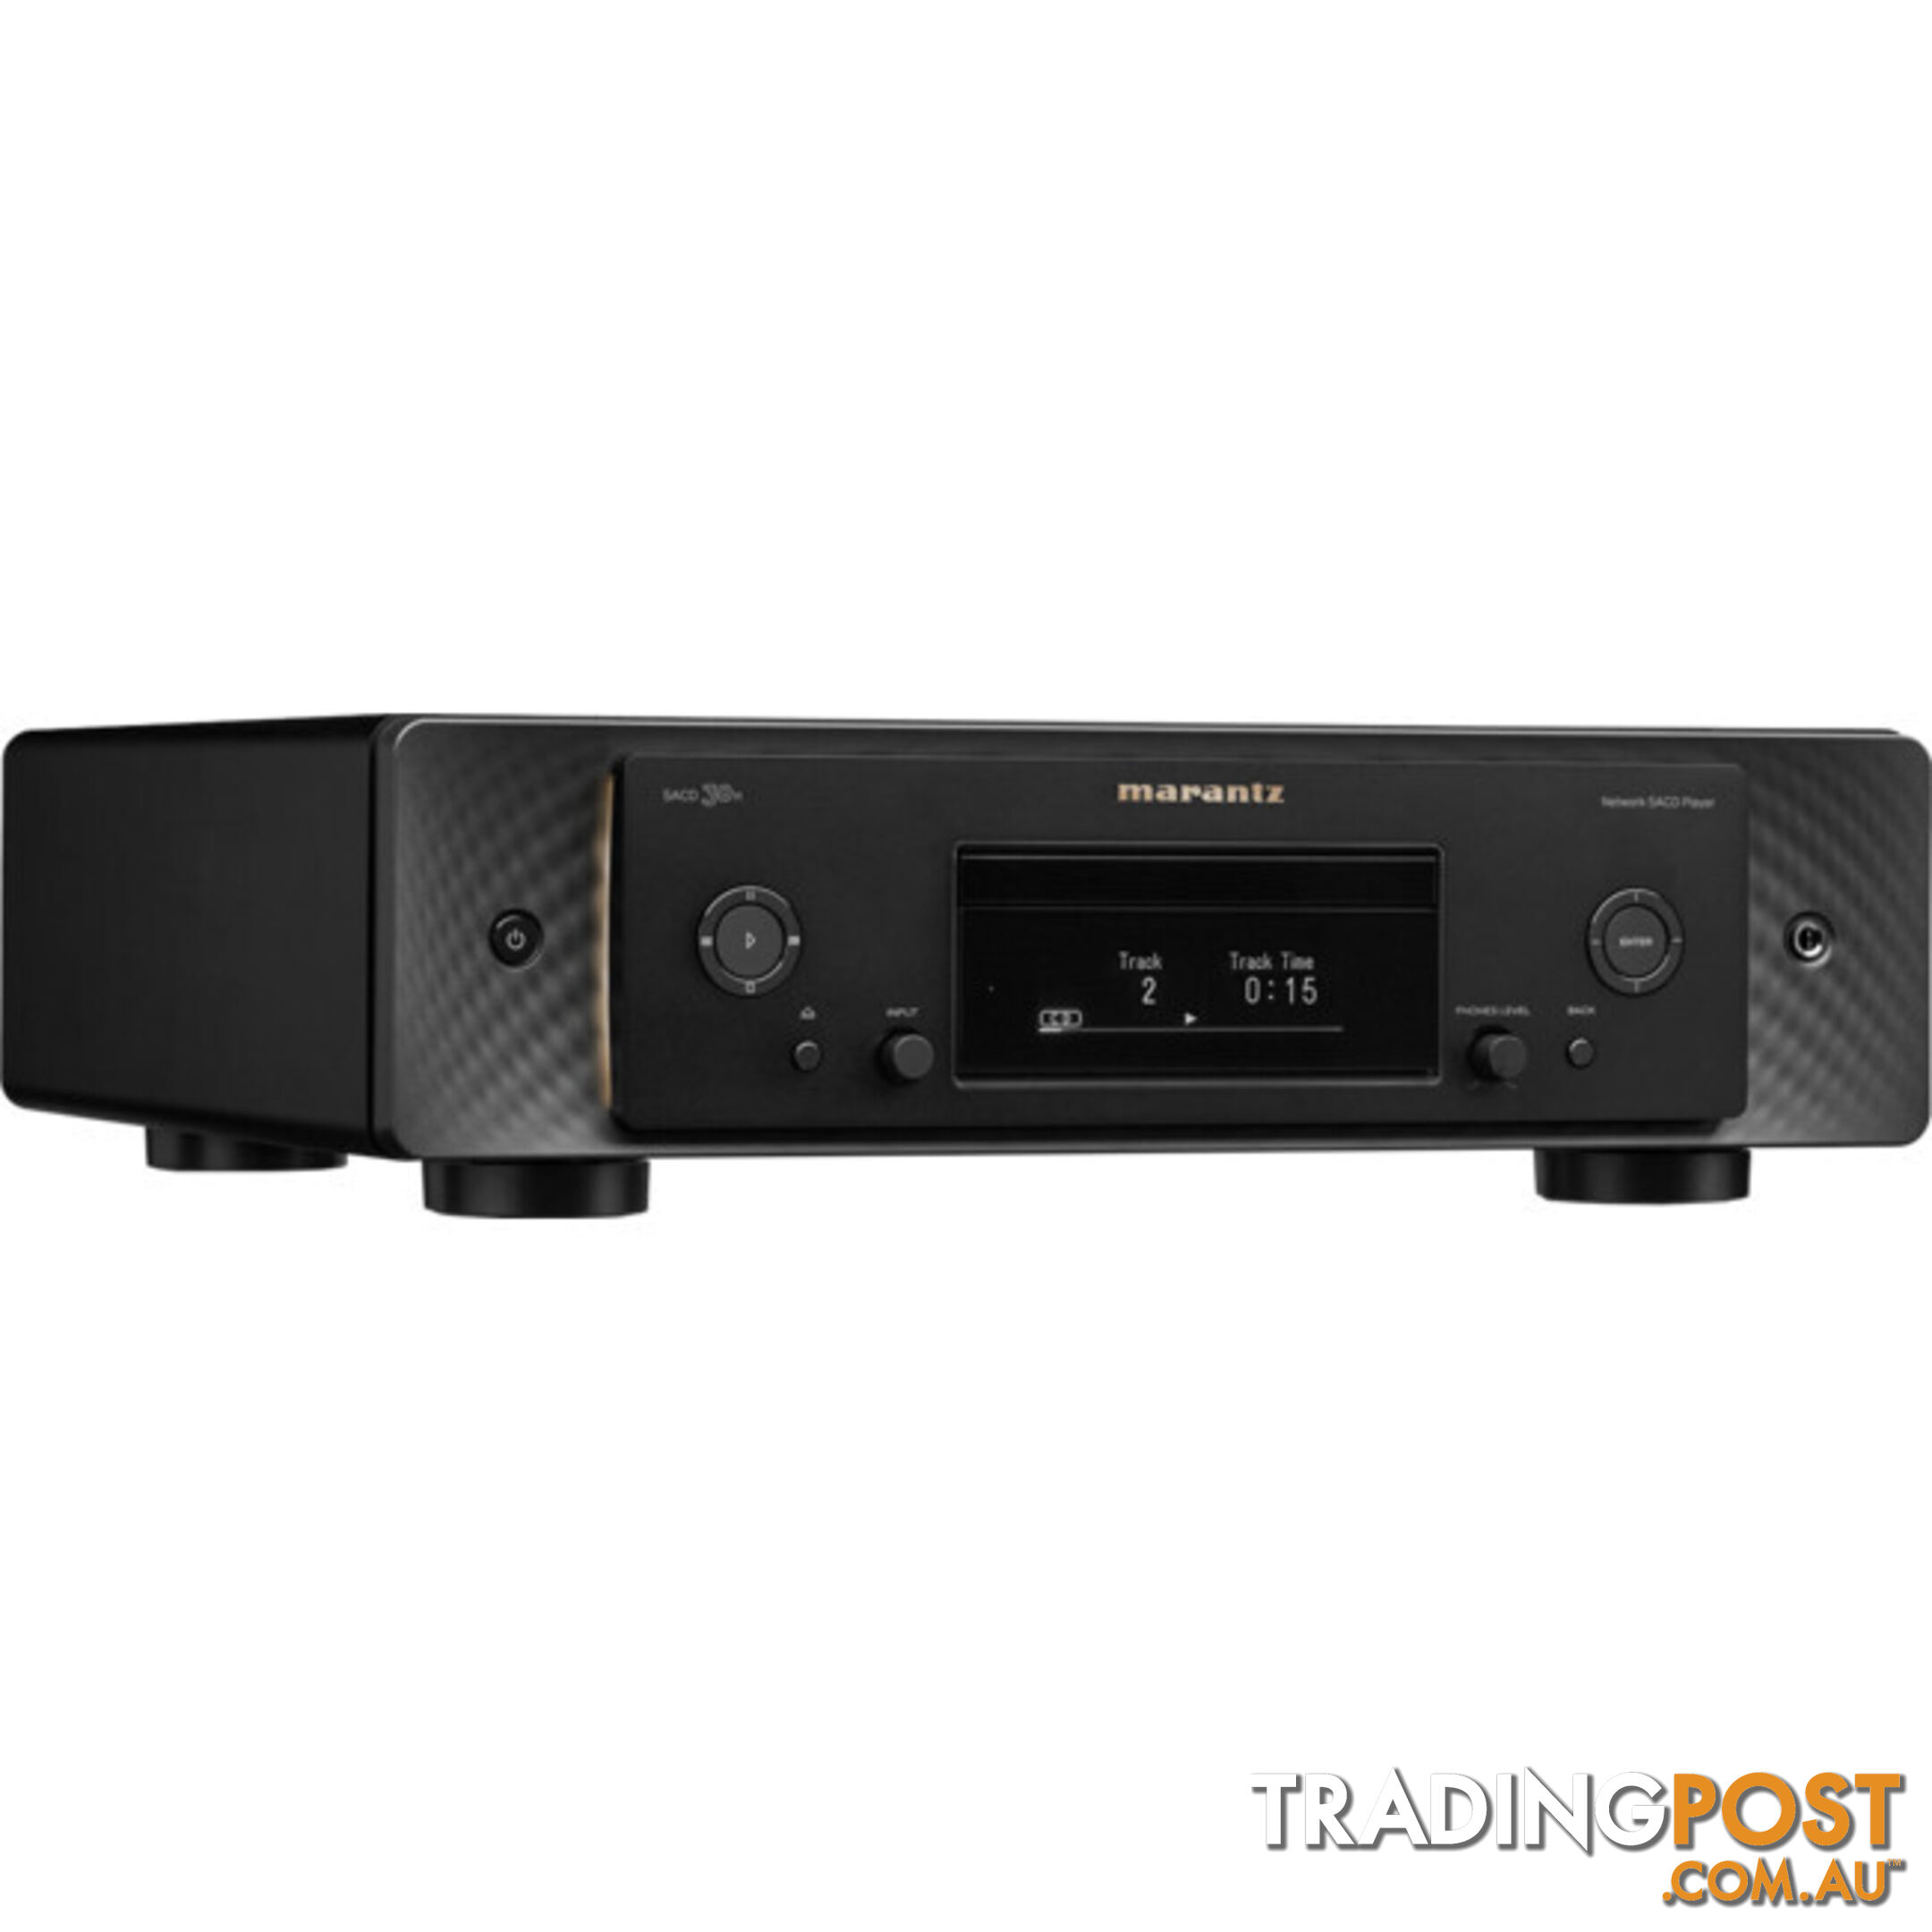 SACD30NB NETWORKED SACD/CD PLAYER WITH HEOS BUILT-IN / SACD 30N BLACK